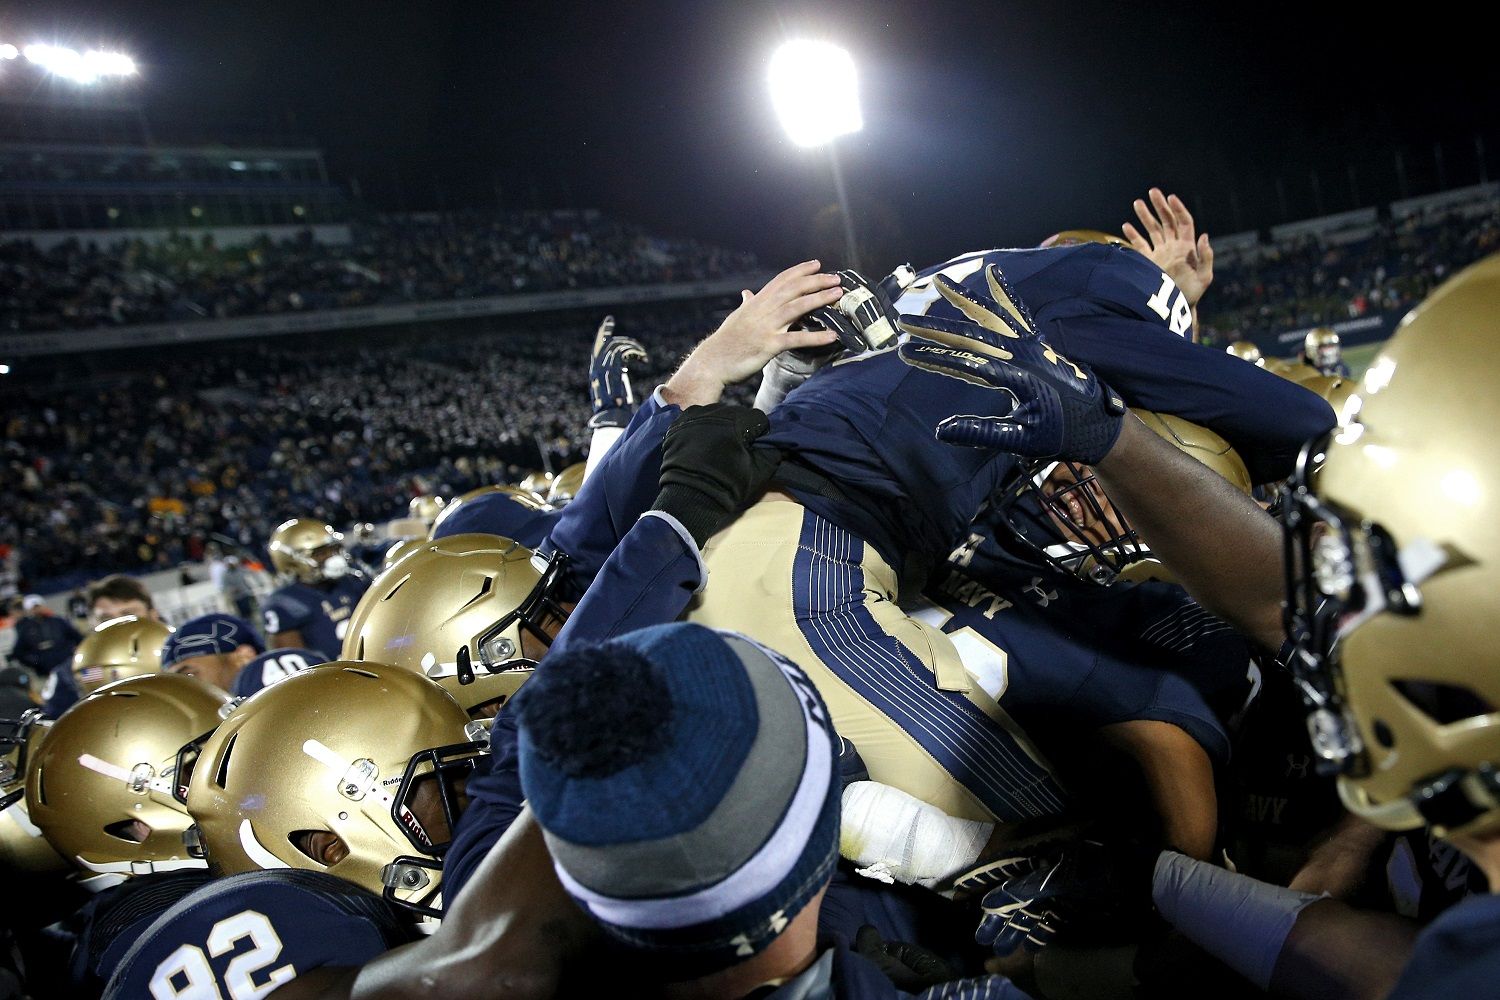 ANNAPOLIS, MD - NOVEMBER 11: Place kicker J.R. Osborn #18 of the Navy Midshipmen celebrates with teammates after kicking the game-winning field goal against the Southern Methodist Mustangs as time expired in the fourth quarter to win, 43-40, at Navy-Marines Memorial Stadium on November 11, 2017 in Annapolis, Maryland. (Photo by Patrick Smith/Getty Images)